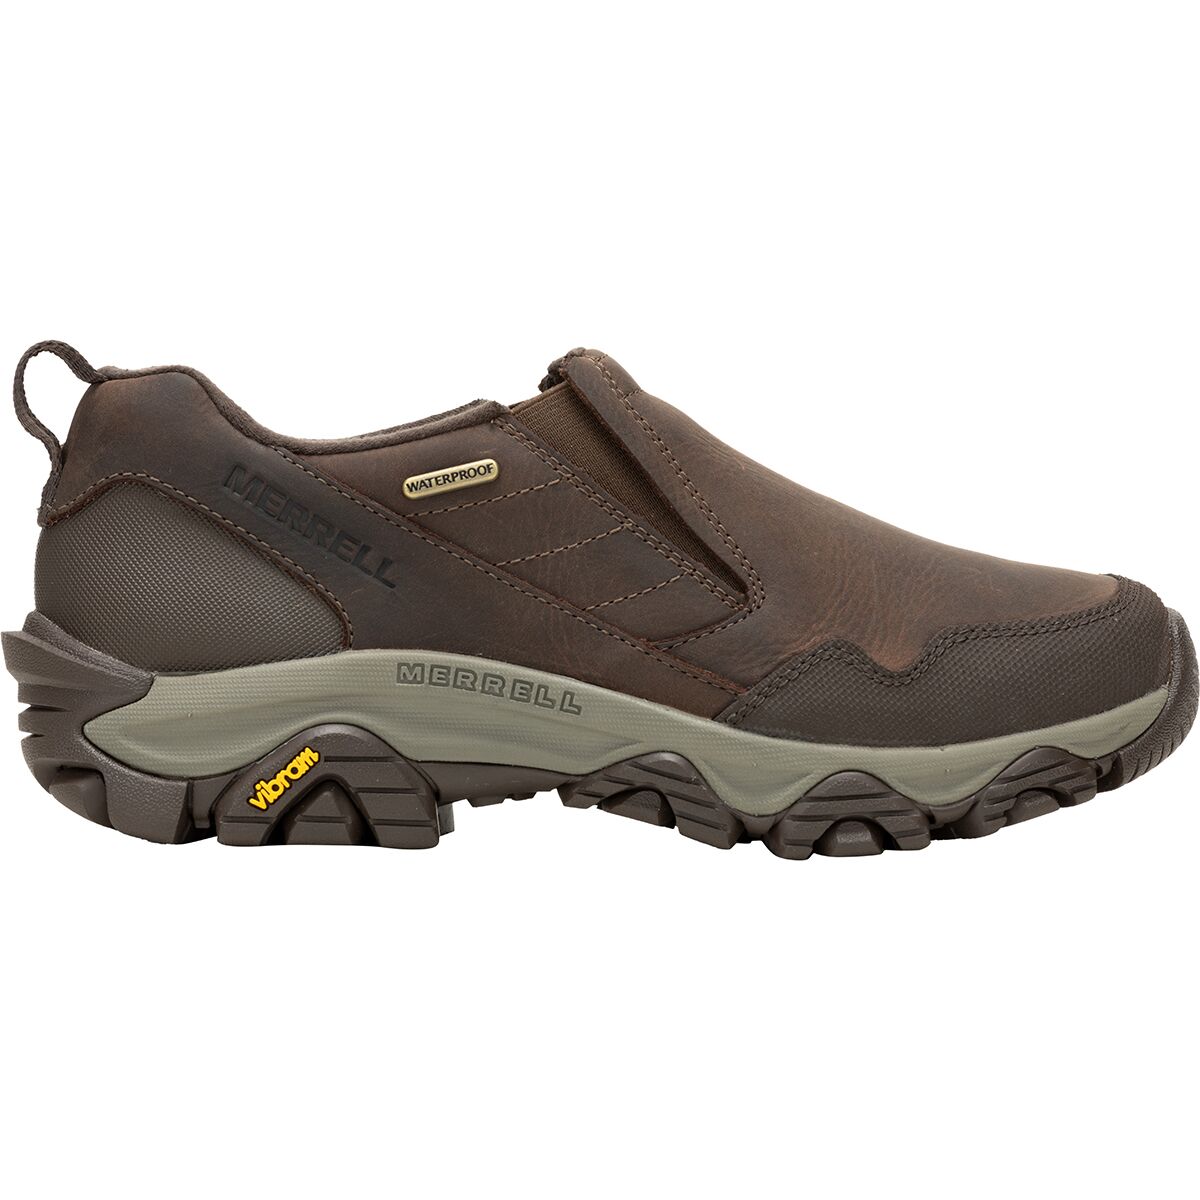 Coldpack 3 Thermo Moc WP Shoe - Women